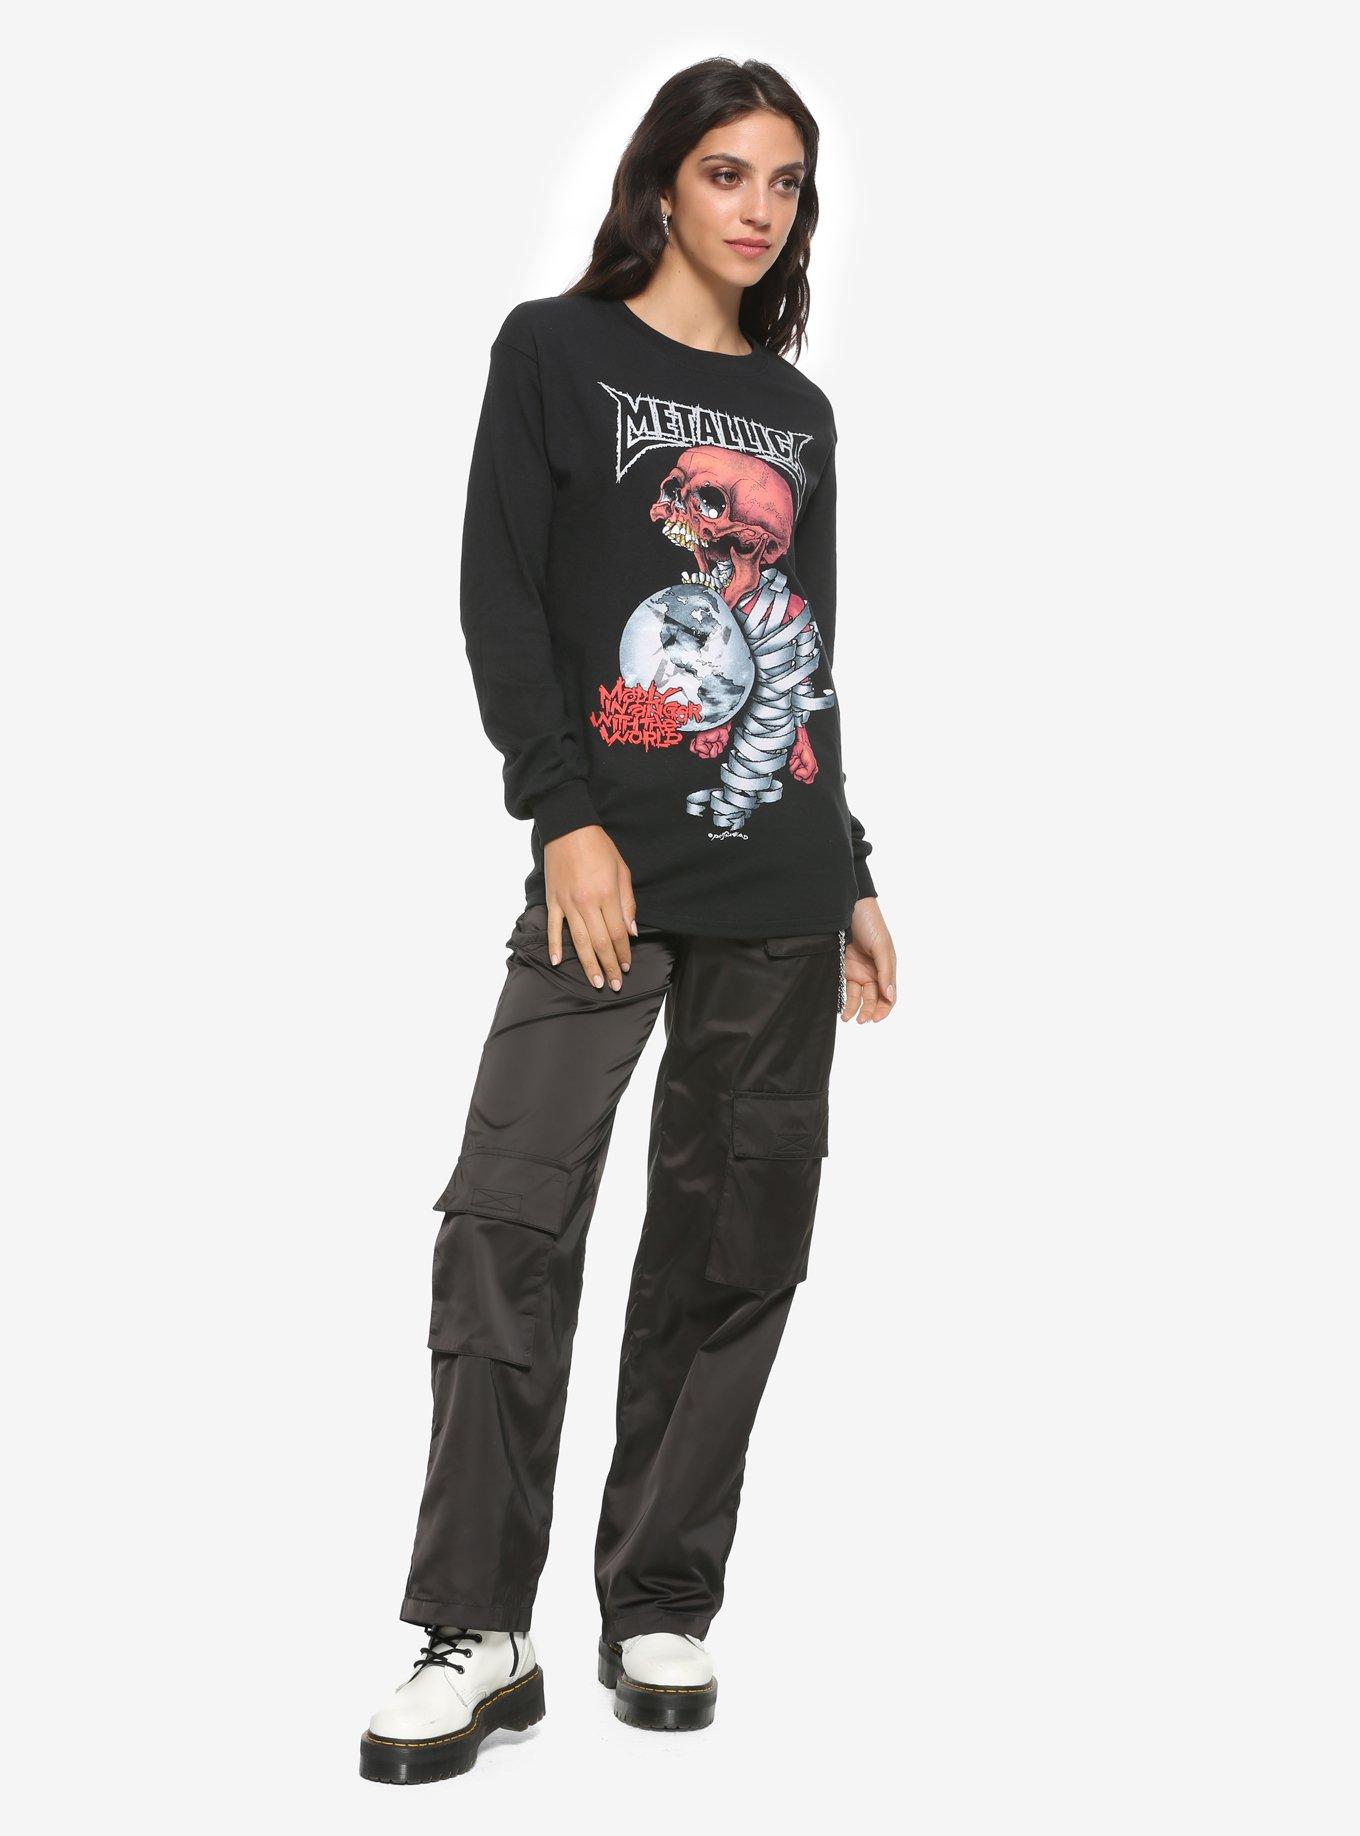 Metallica Madly In Anger With The World Tour Girls Long-Sleeve T-Shirt, BLACK, alternate